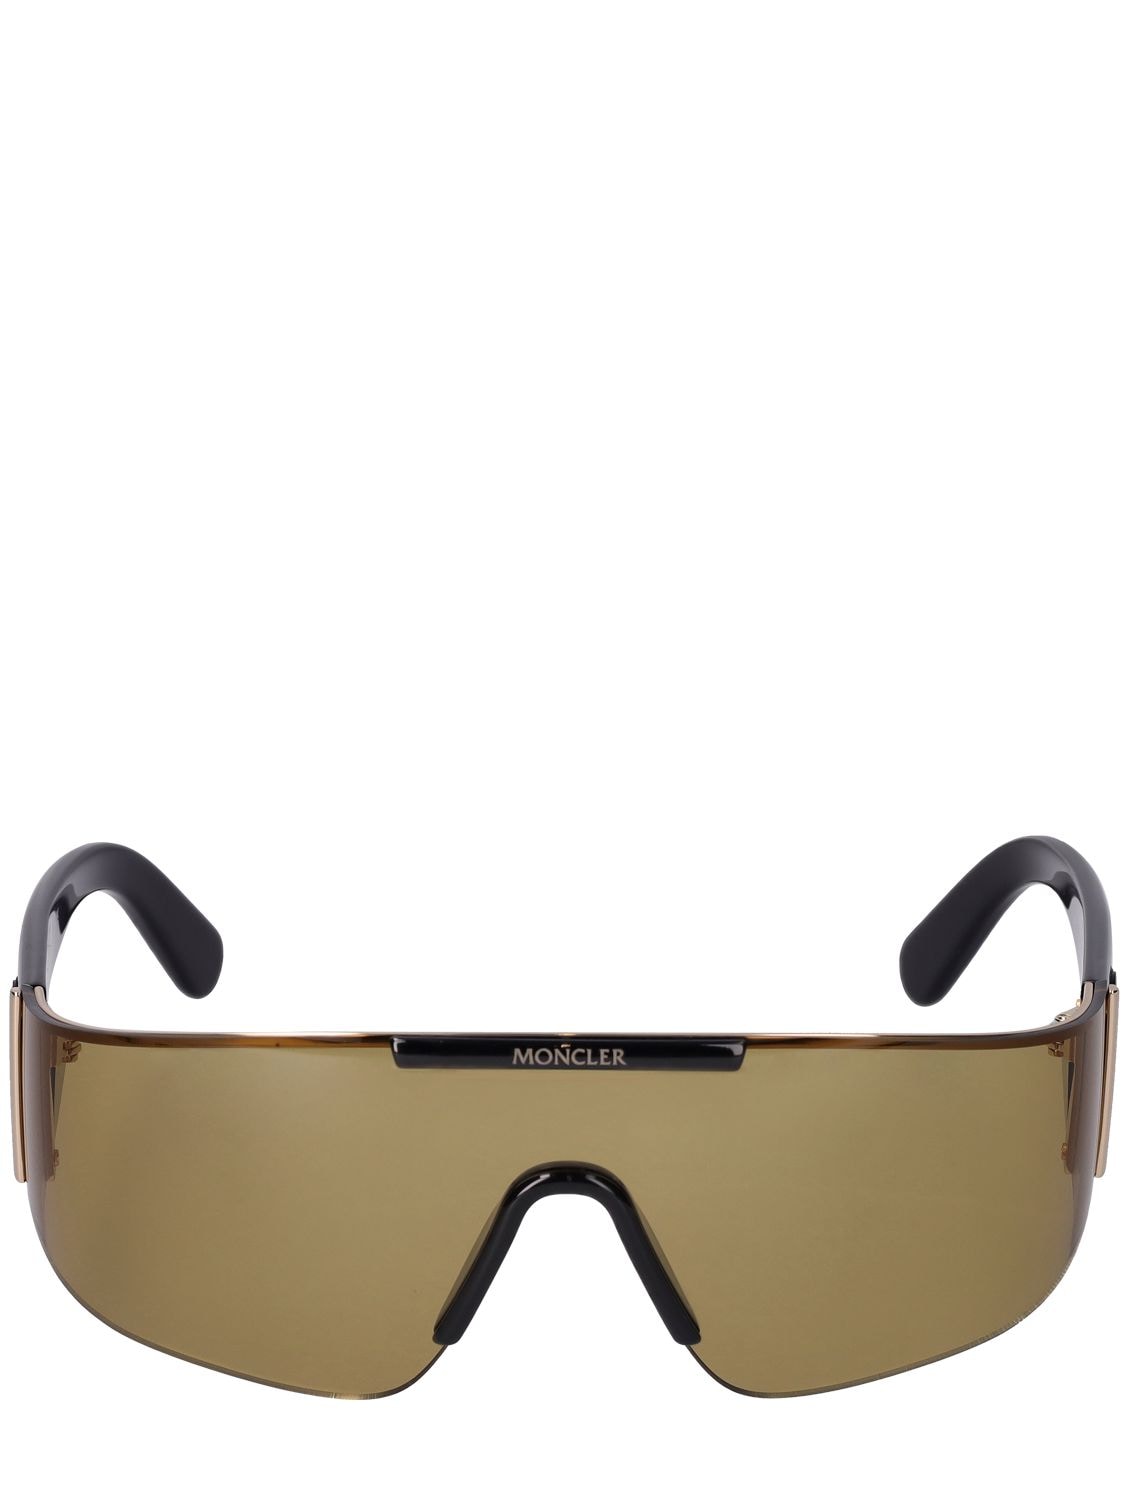 Moncler Ombrate Mask Metal Sunglasses In Black,brown